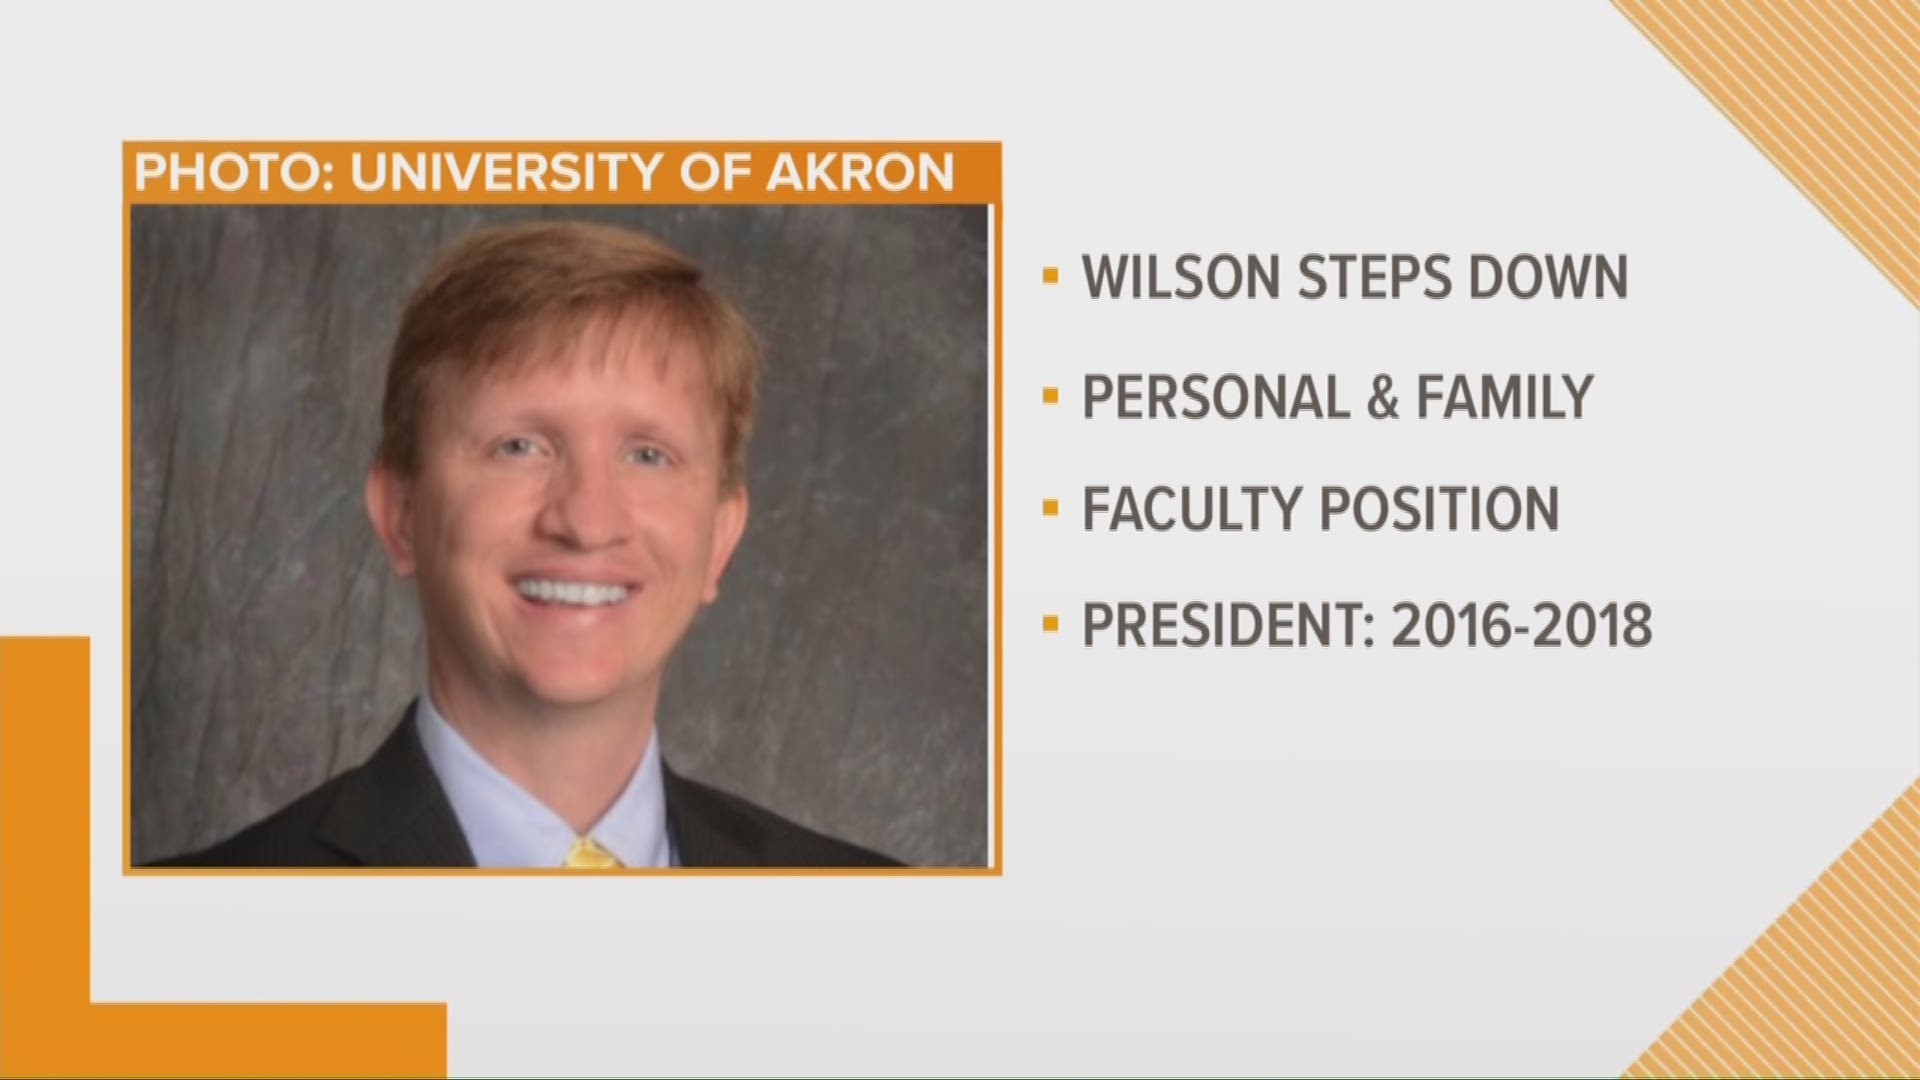 March 22, 2018: University of Akron President Matthew Wilson announced his intentions to step down from his role to become a full-time faculty member.